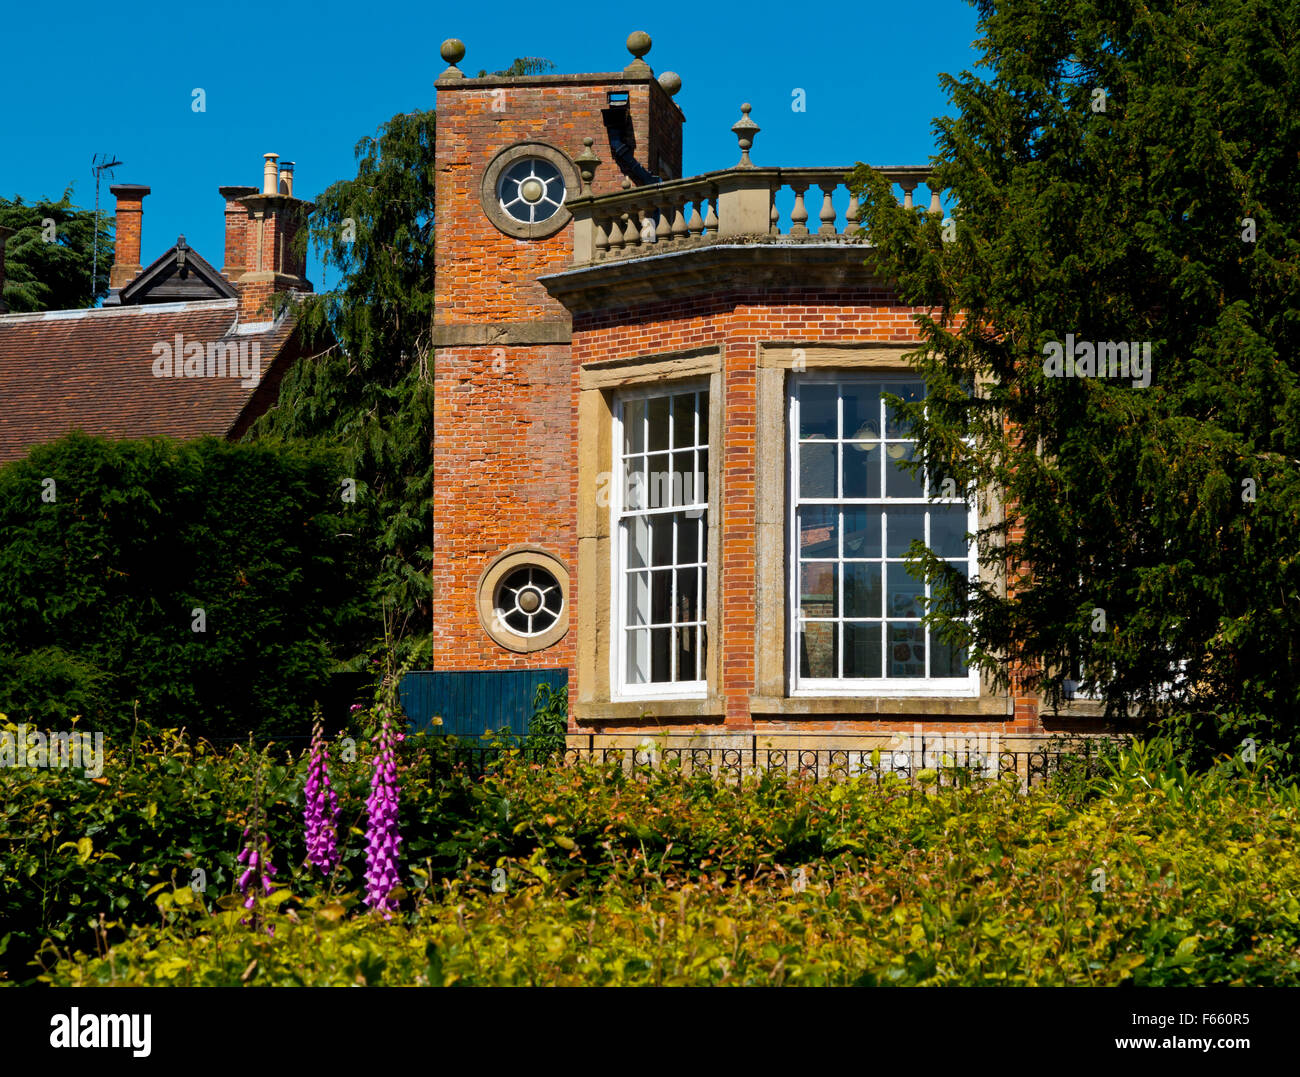 The Orangery and garden at Rufford Abbey near Ollerton in Nottinghamshire England UK in the grounds of Rufford Country Park Stock Photo